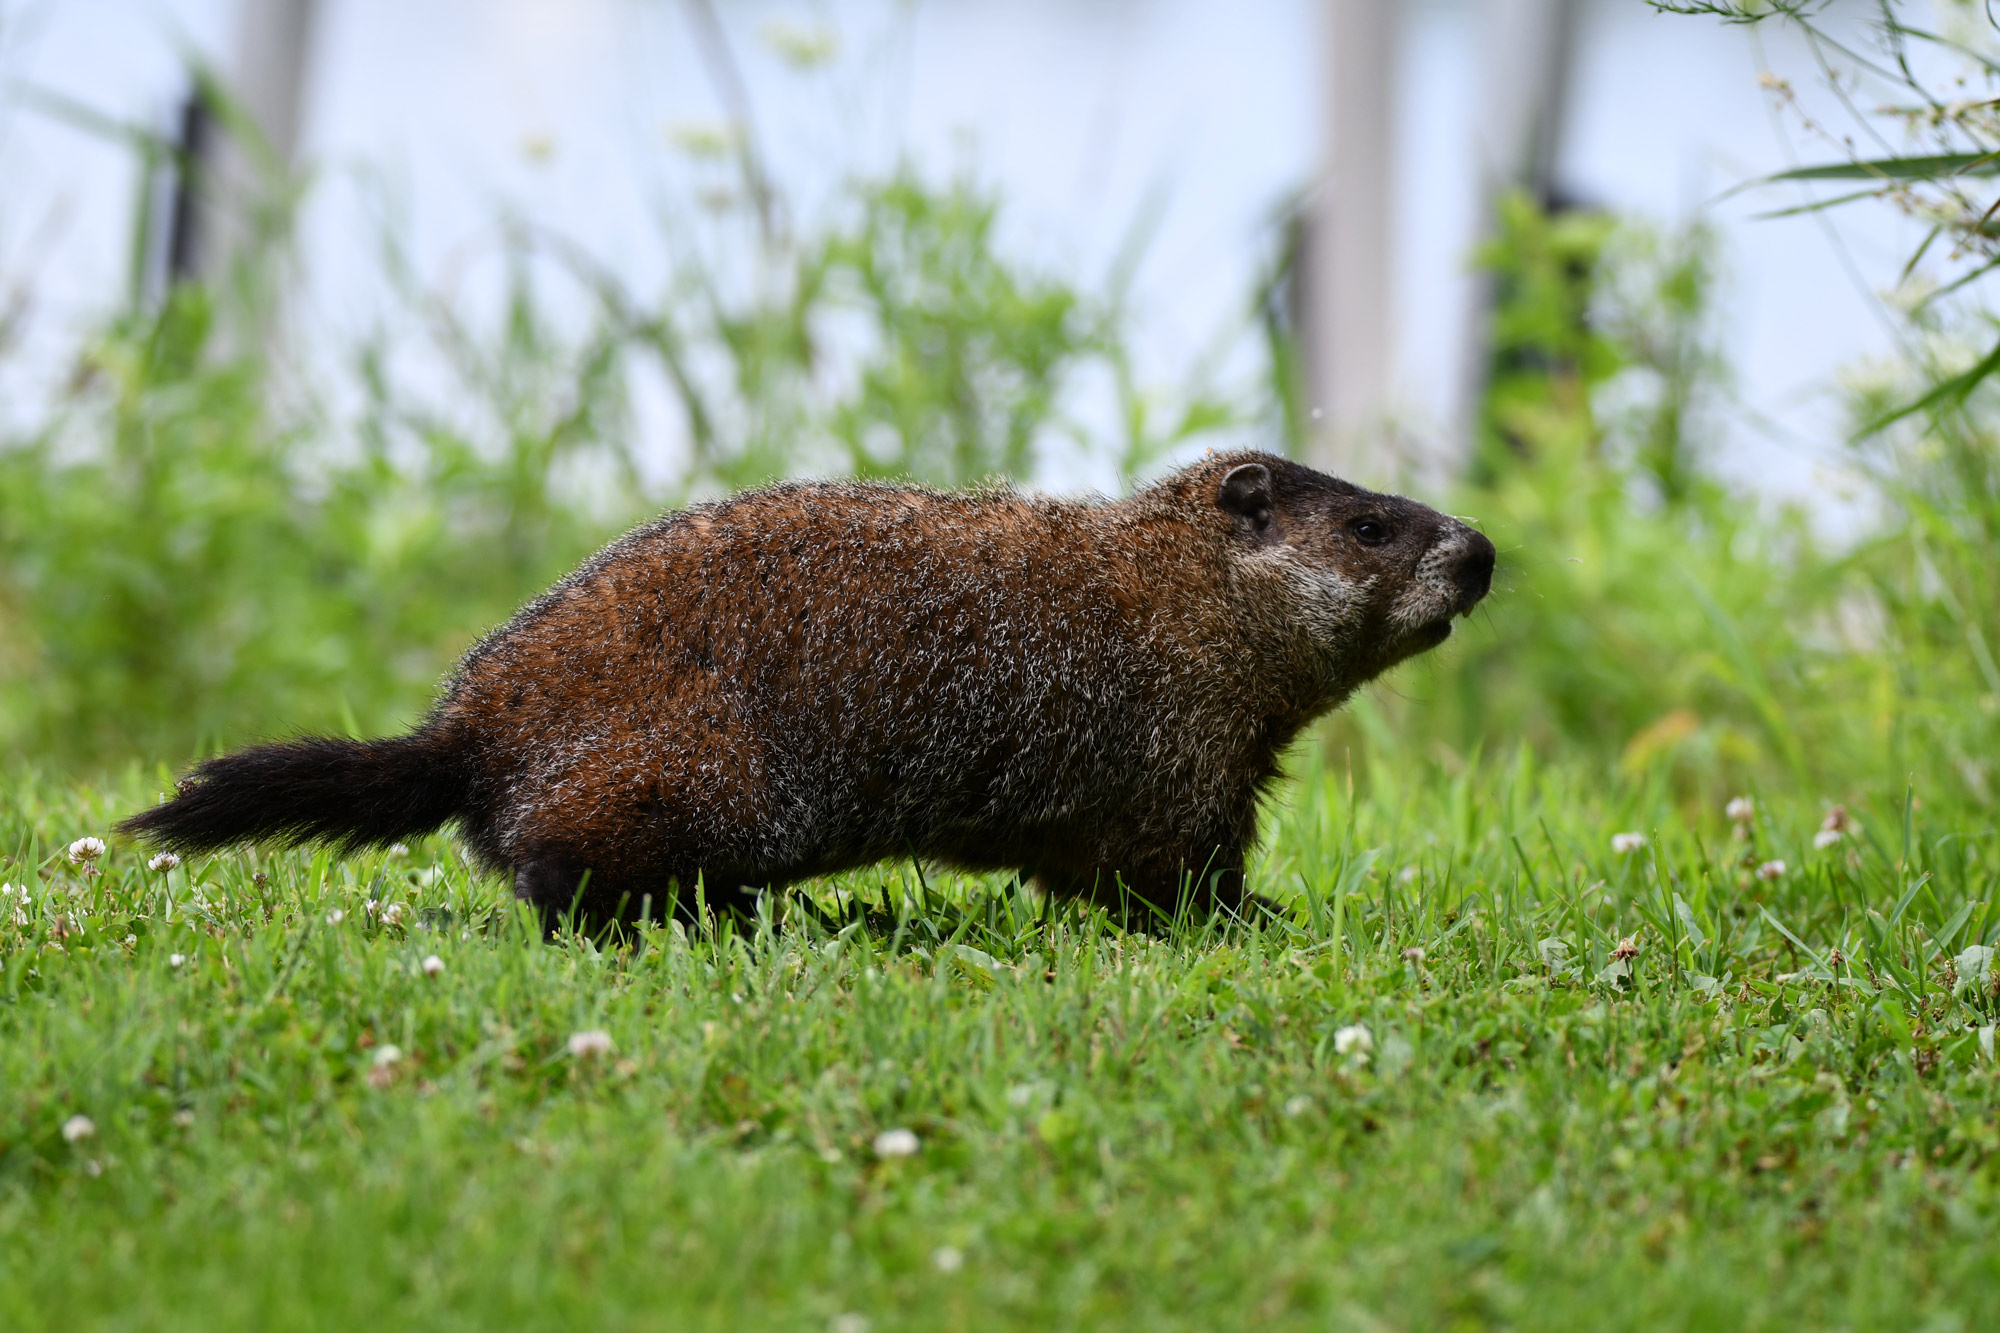 A groundhog walking in the grass